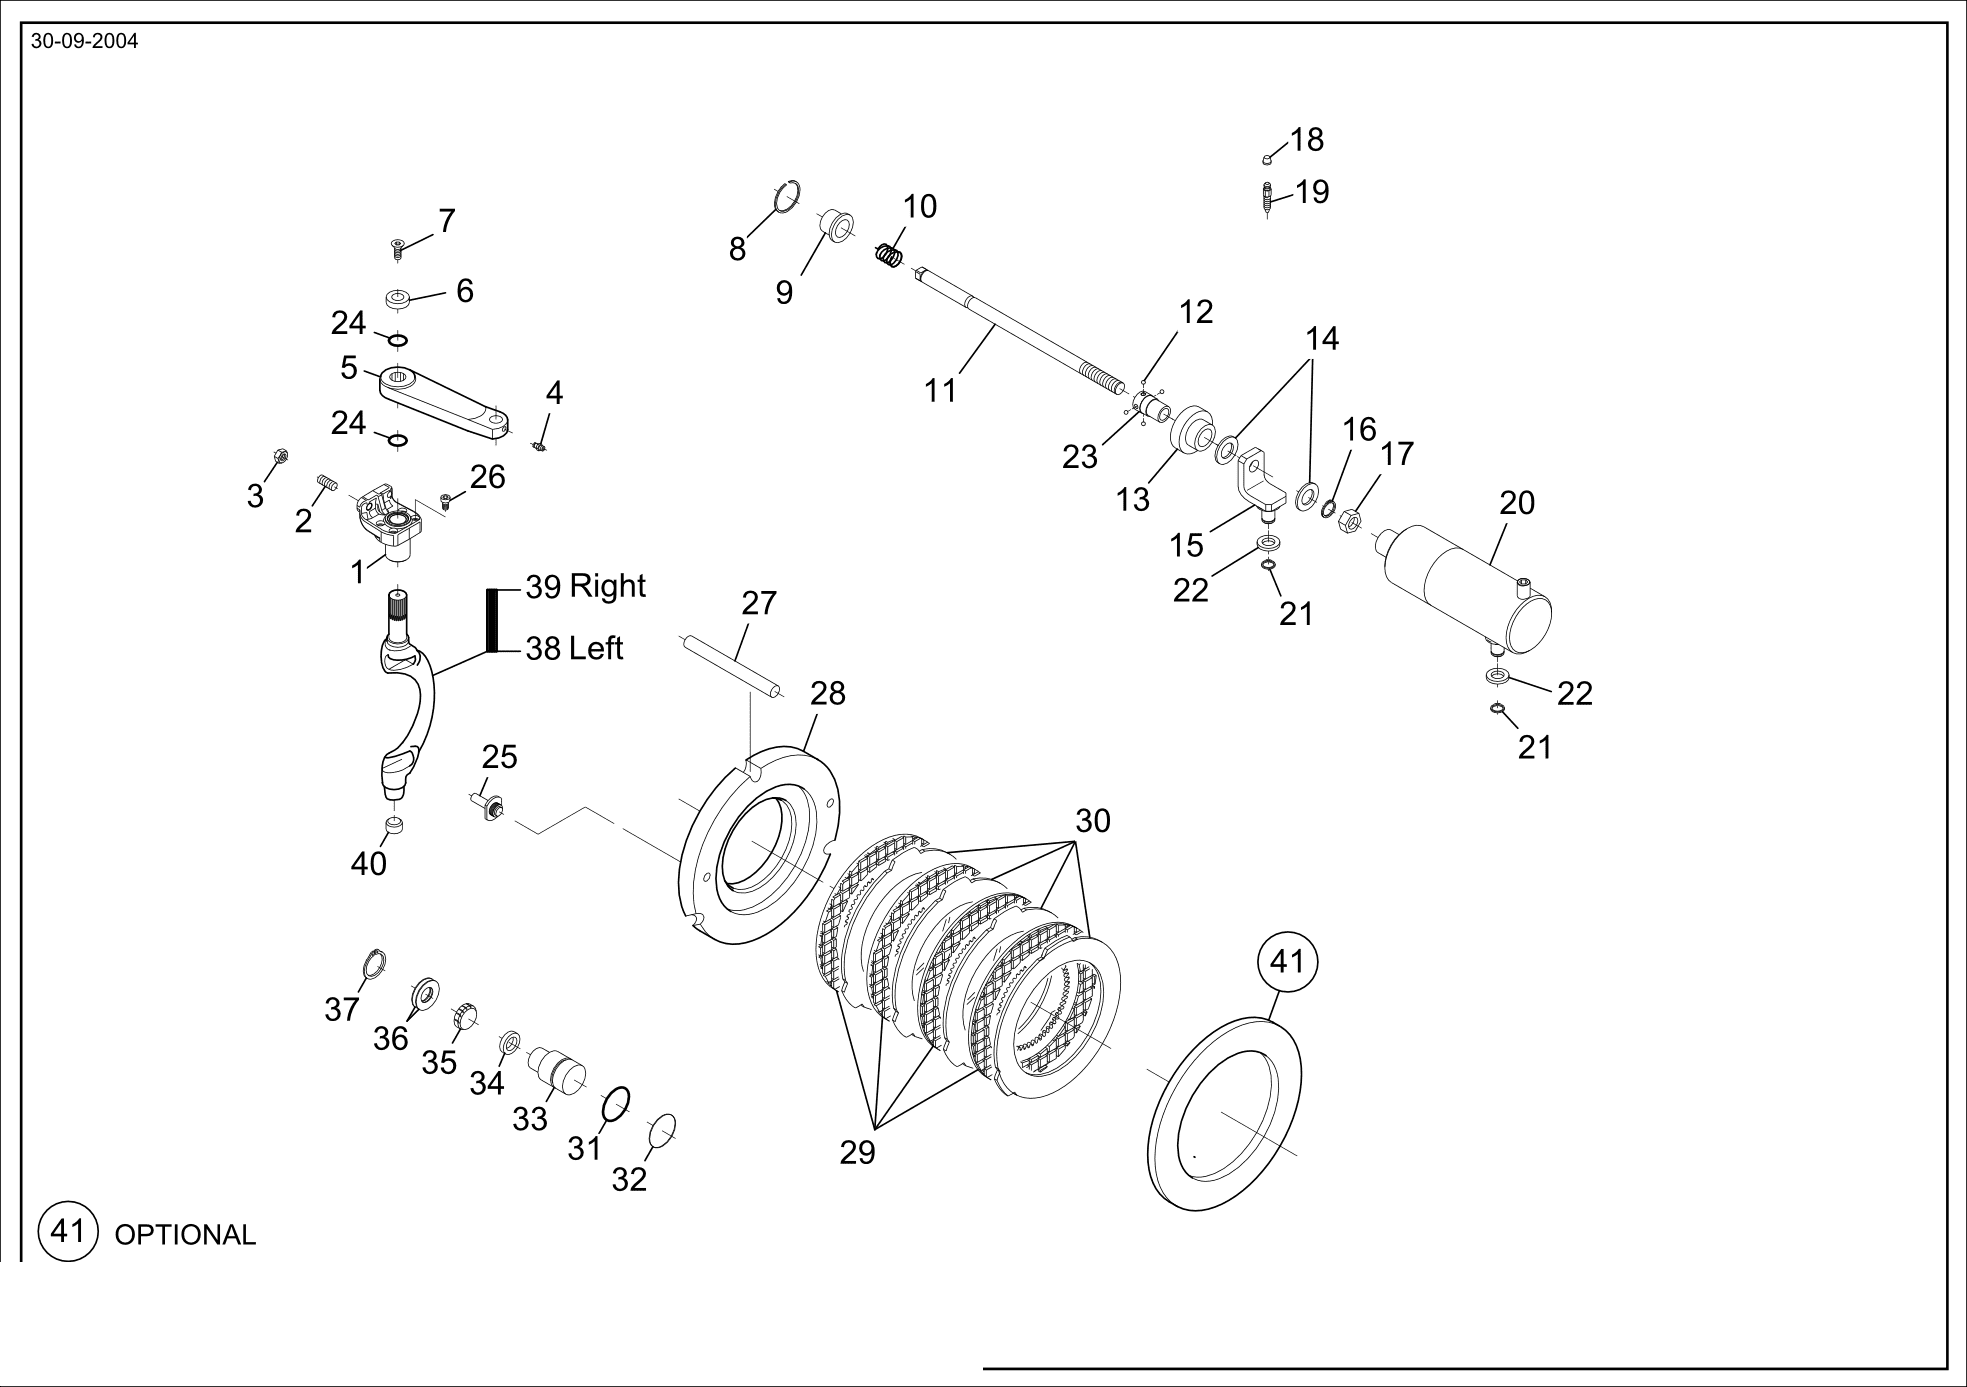 drawing for GHH 1202-0105 - SUPPORT (figure 5)